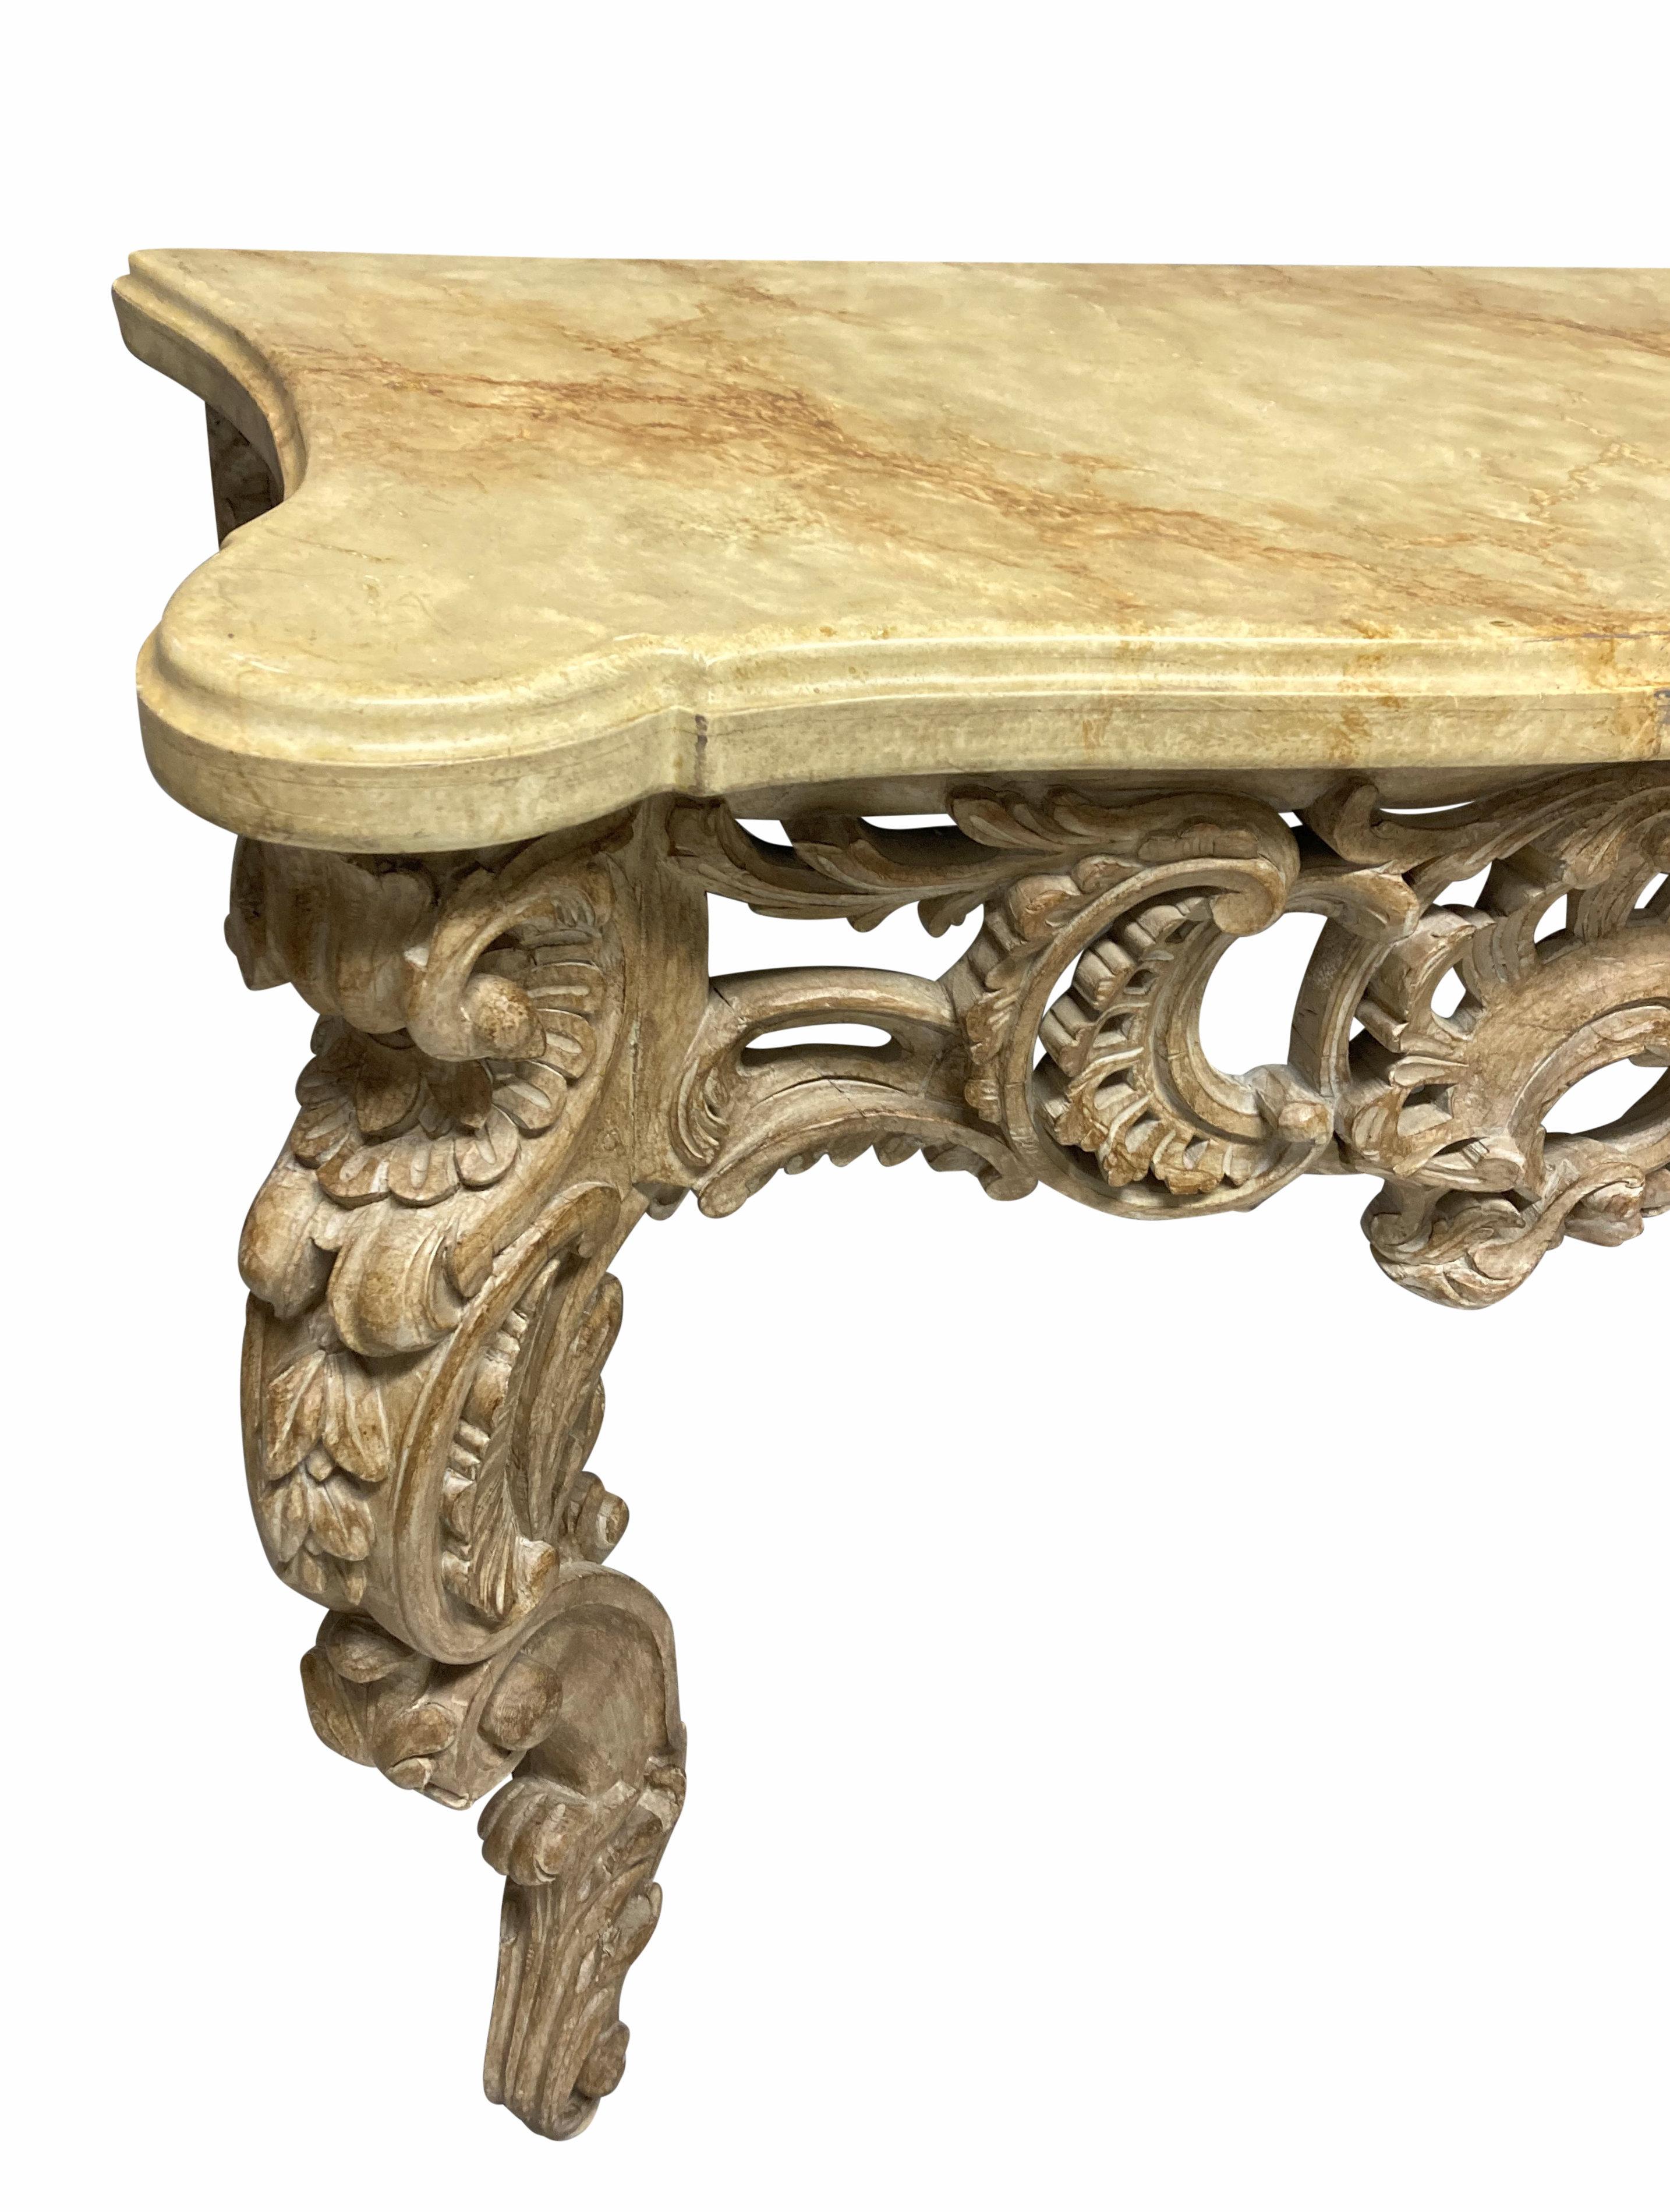 An Italian carved and limed fruitwood console table in the XVIII Century style, with a shaped faux marble top.